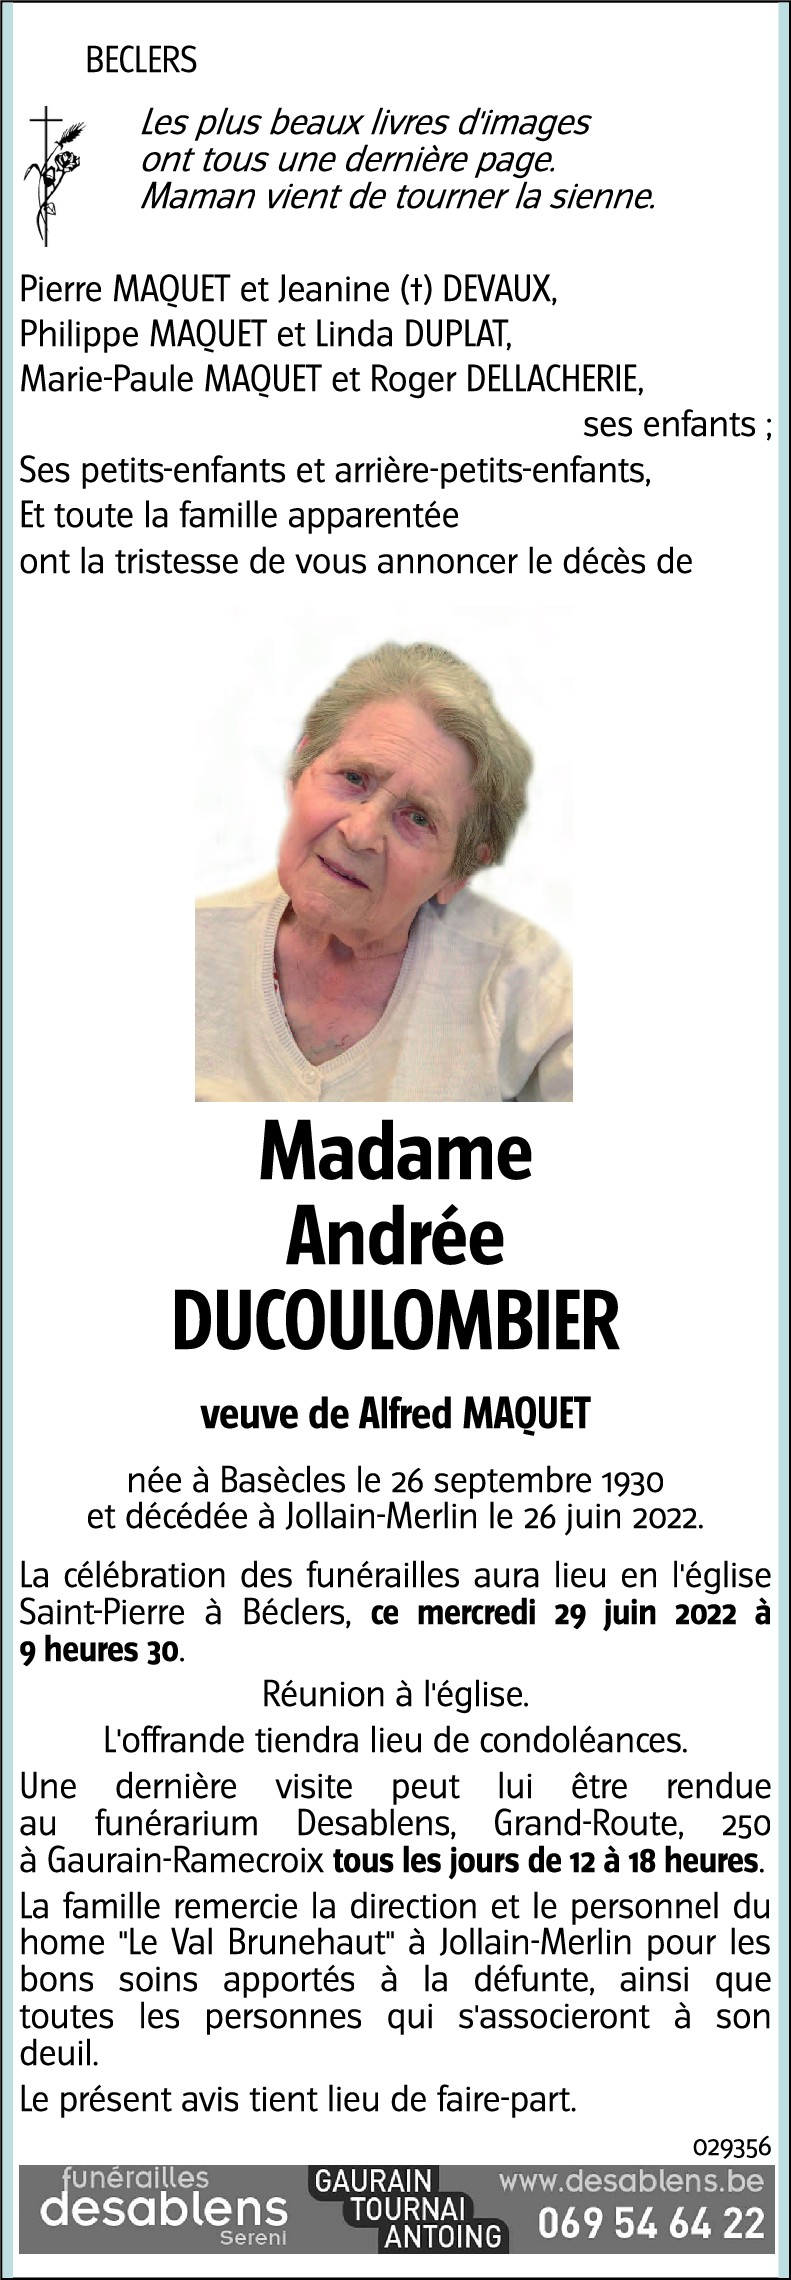 Andrée DUCOULOMBIER